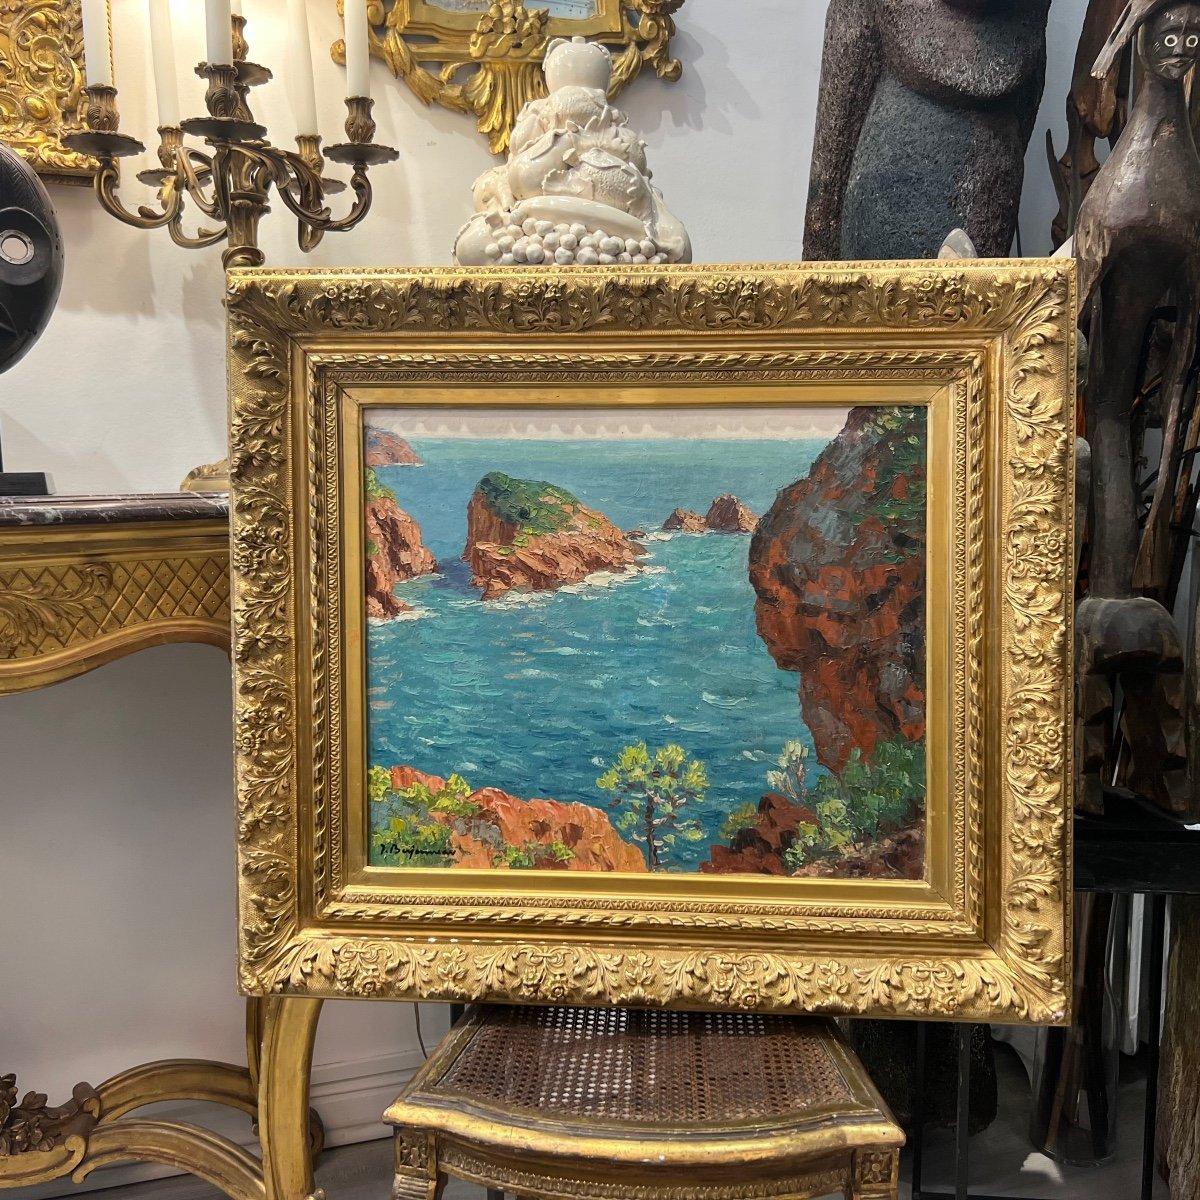 'Corniche de l'Esterel' by Jehan Berjonneau (1890-1966), this artwork captures the stunning beauty of the Corniche de l'Esterel, also known as the Corniche d’Or, a marvellous road nestled between the Esterel mountains and the beautiful turquoise sea